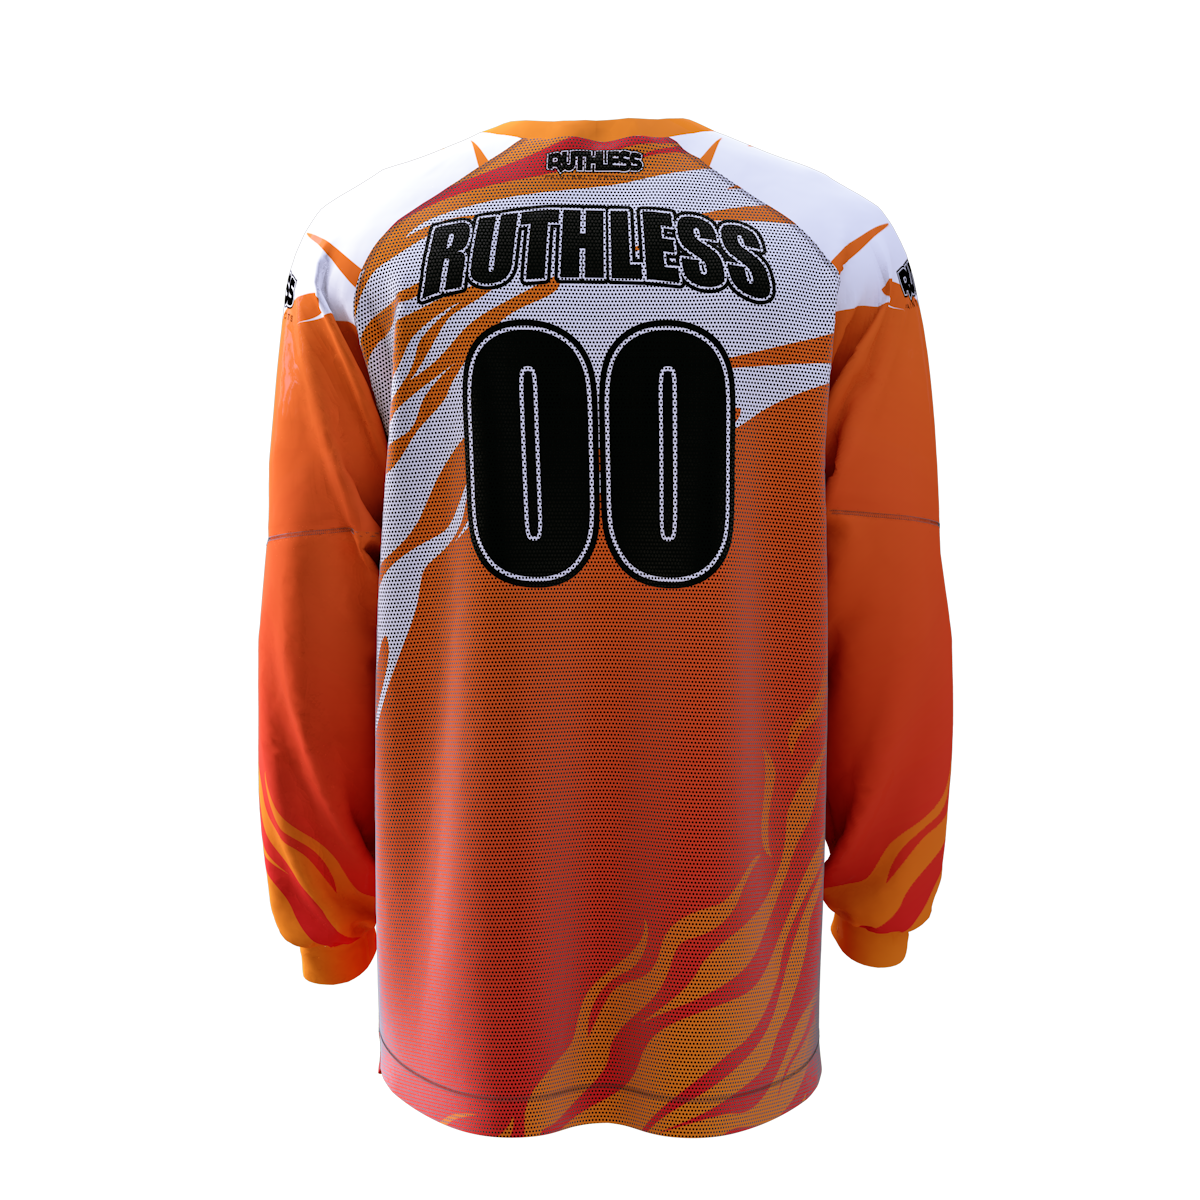 Fire Breeze Jersey - Ruthless Paintball Products